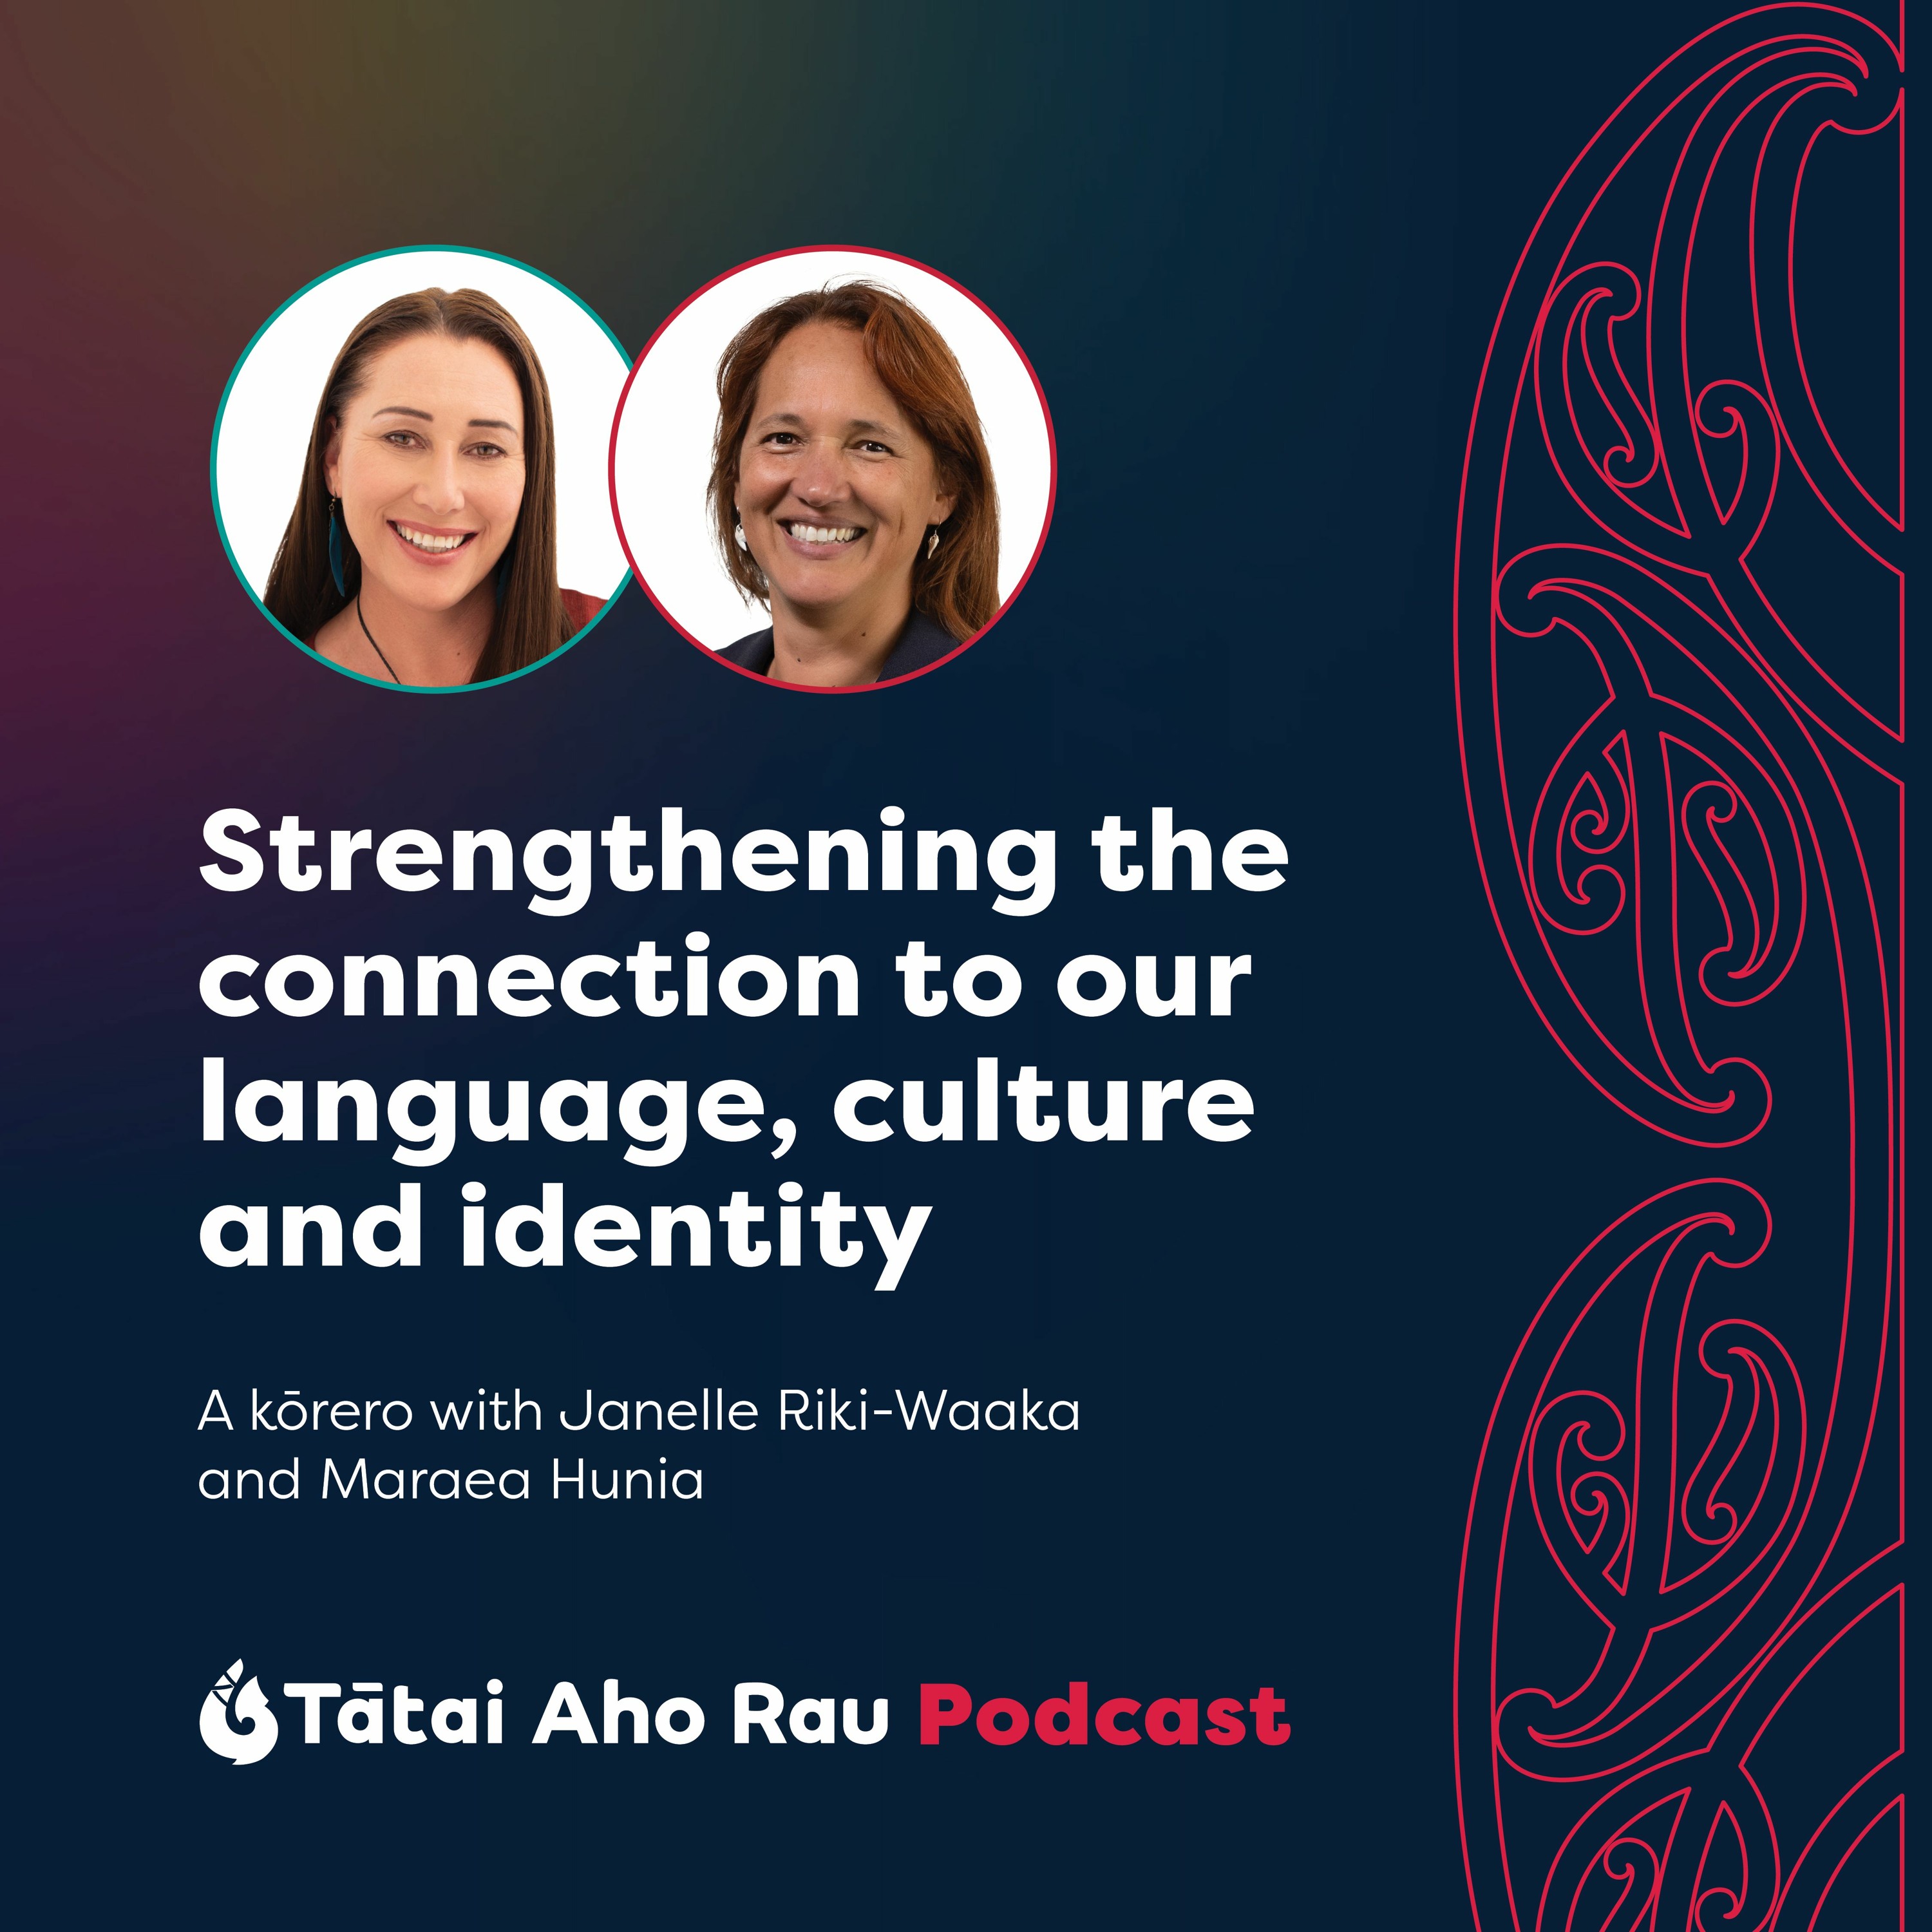 Strengthening the connection to our language, culture and identity